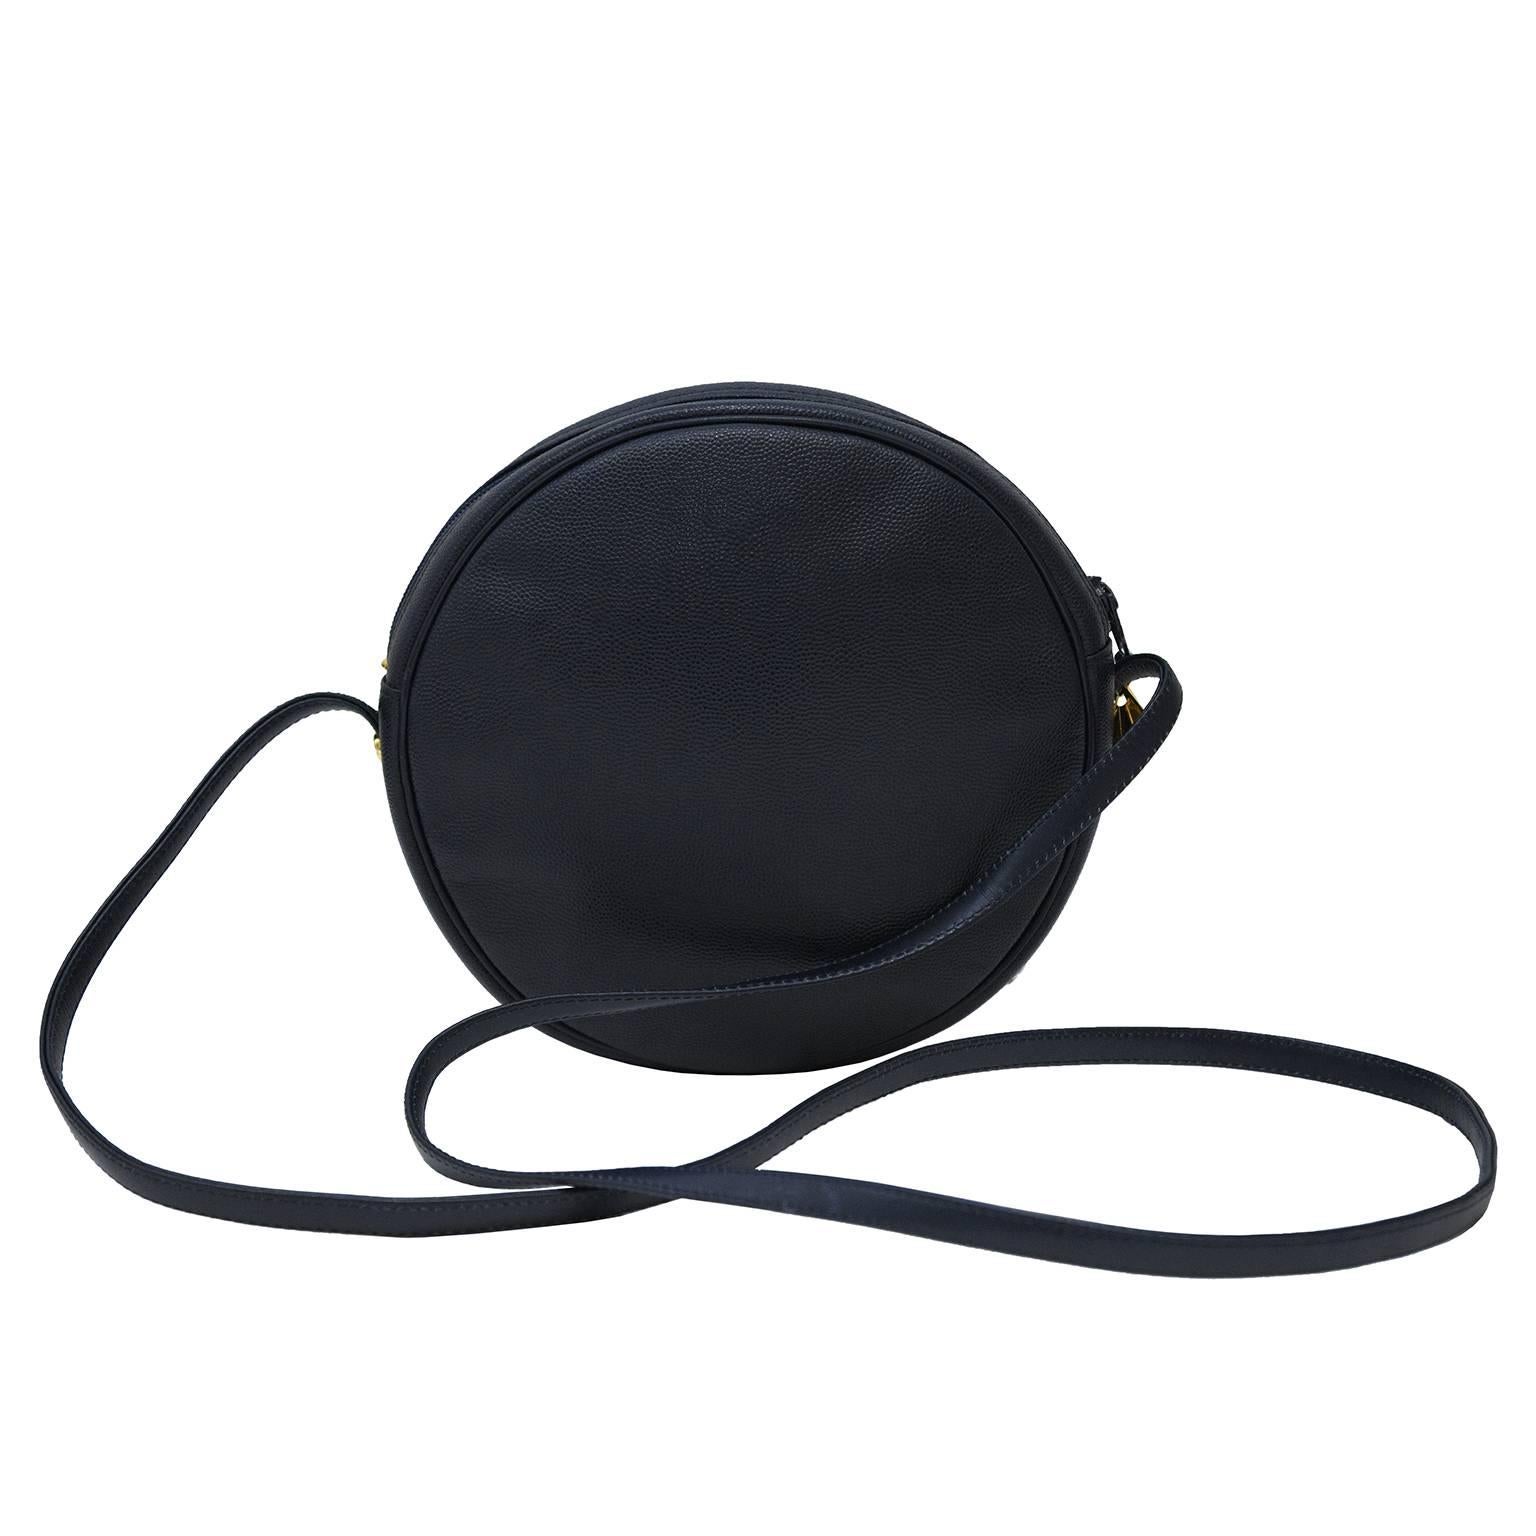 Midnight blue pebbled leather round crossbody bag by Karl Lagerfeld from the 1980's. Zip top closure goldtone fan shaped pull tab, goldtone logo hardware affixed to the front of the bag above a single open front pocket and goldtone rivets along the